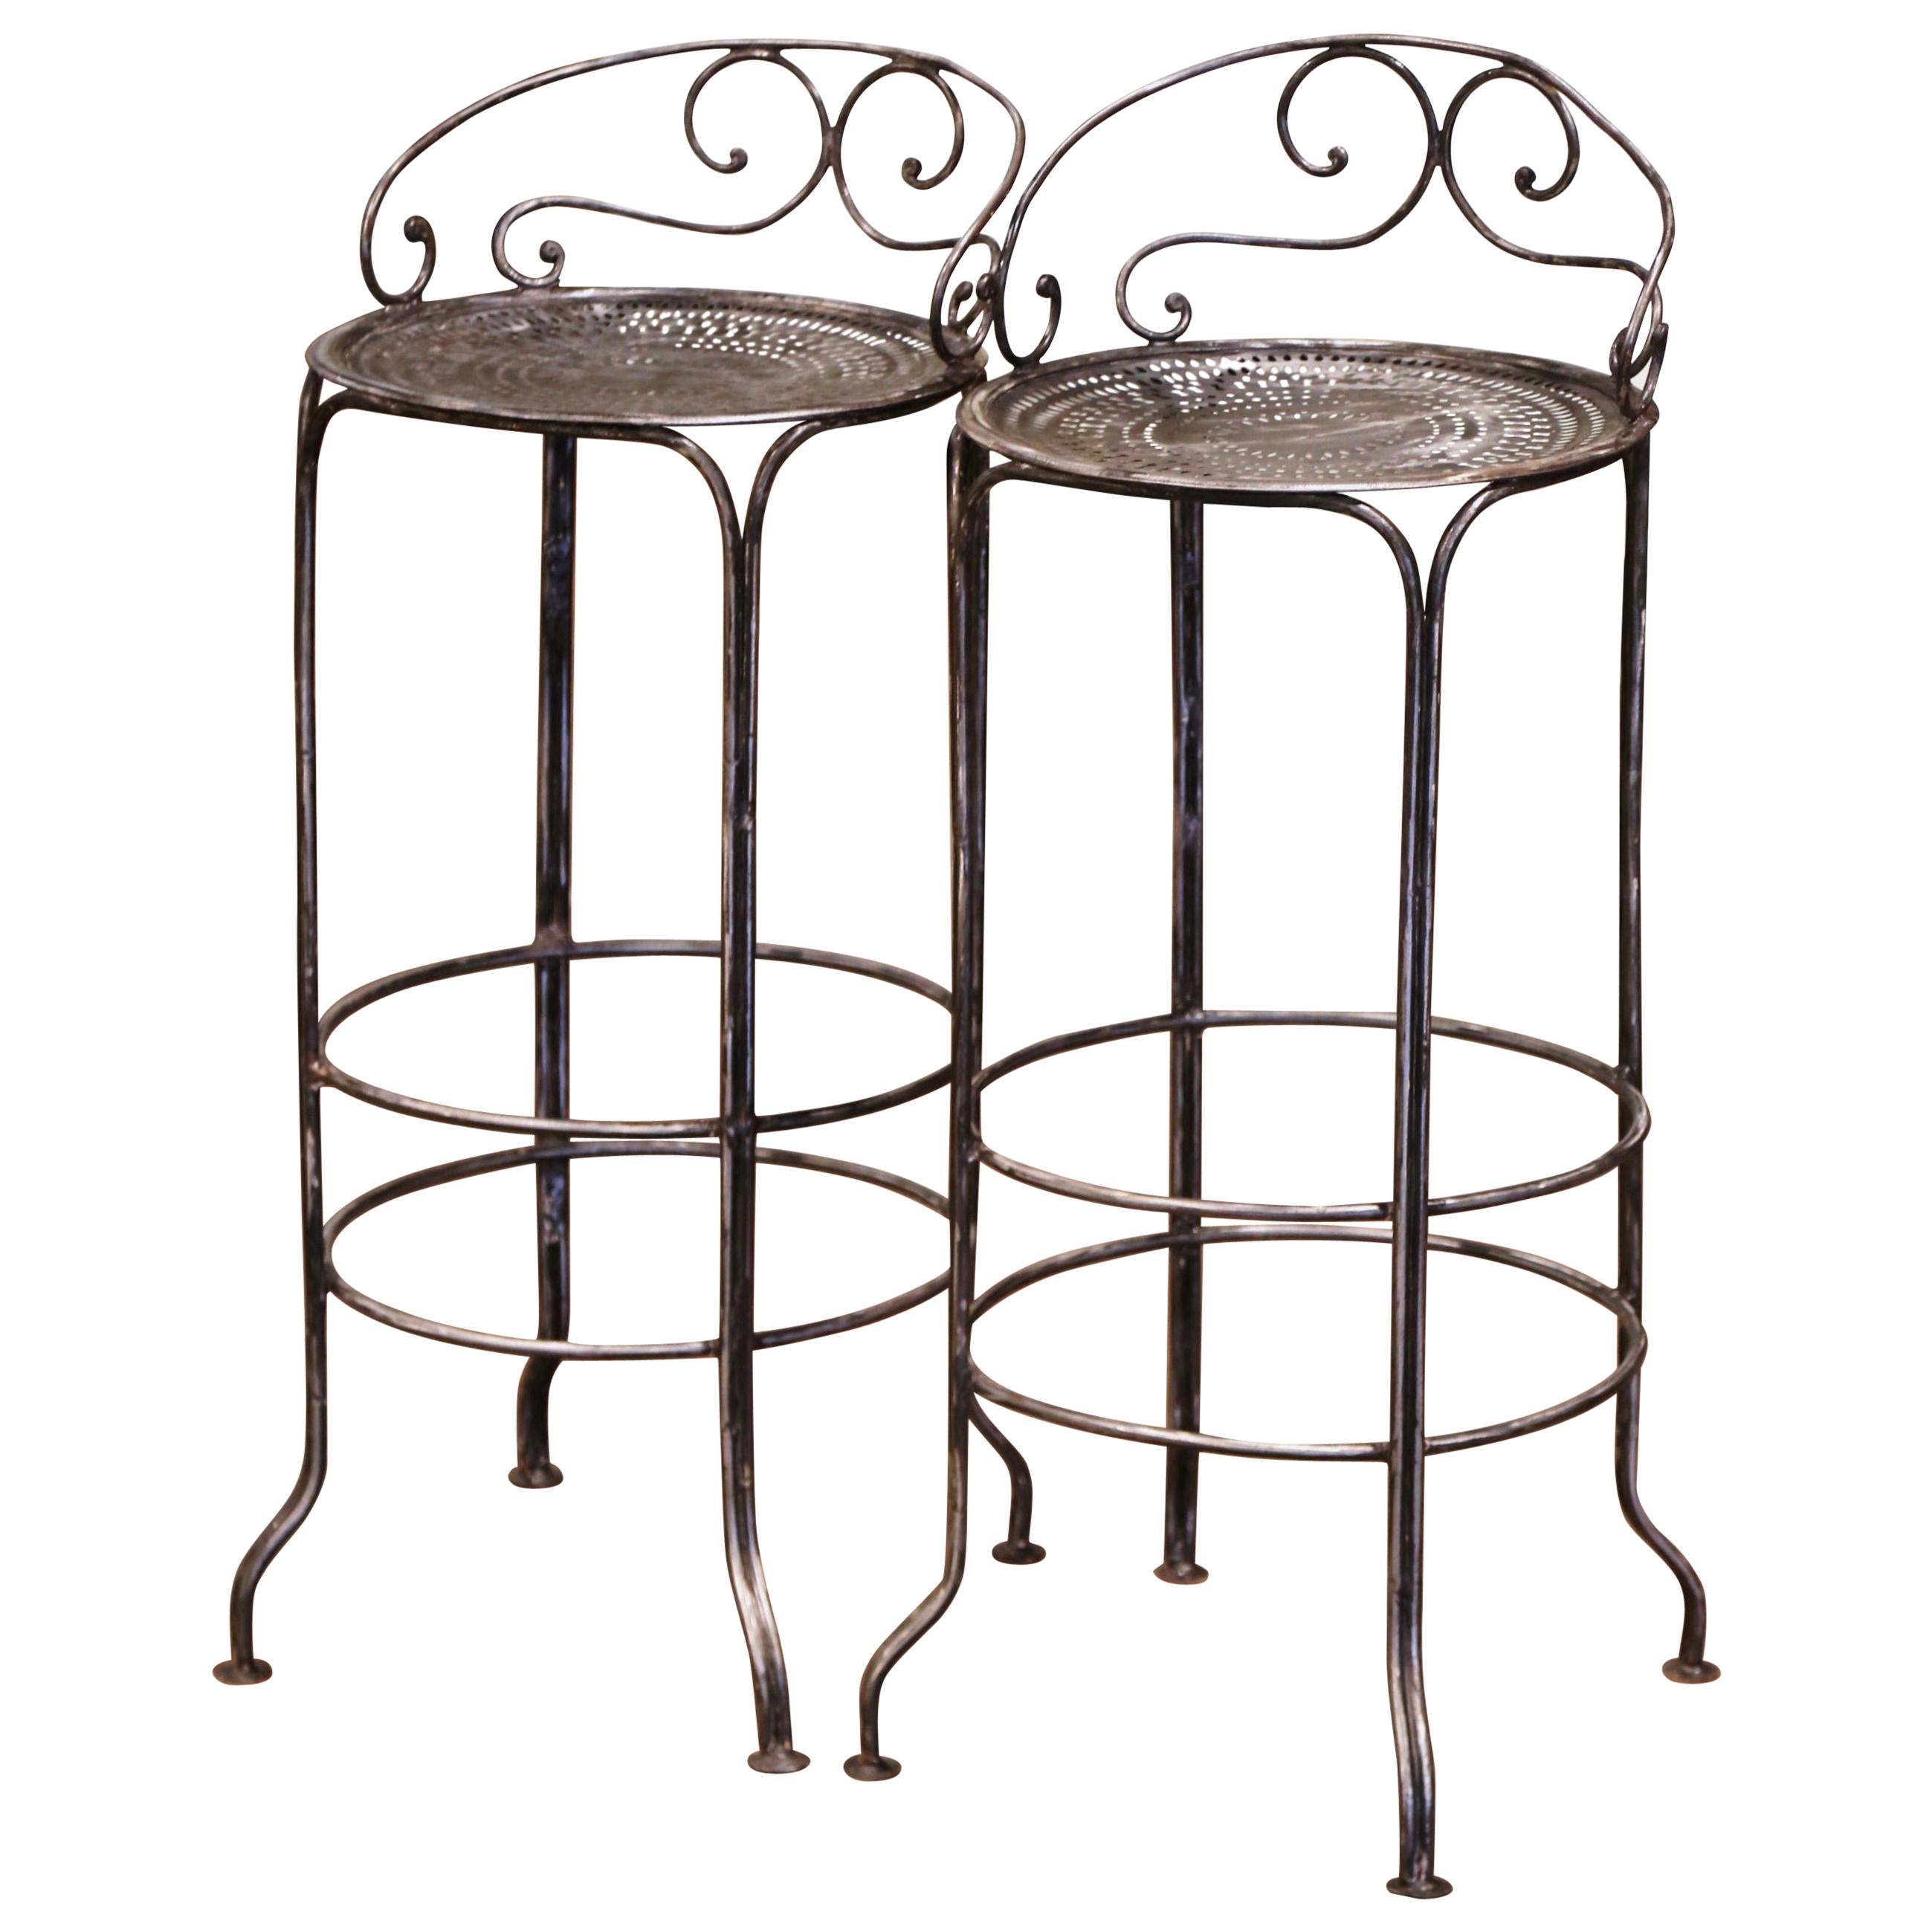 Pair of 19th Century French Polished Wrought Iron Outdoor Garden Bar Stools